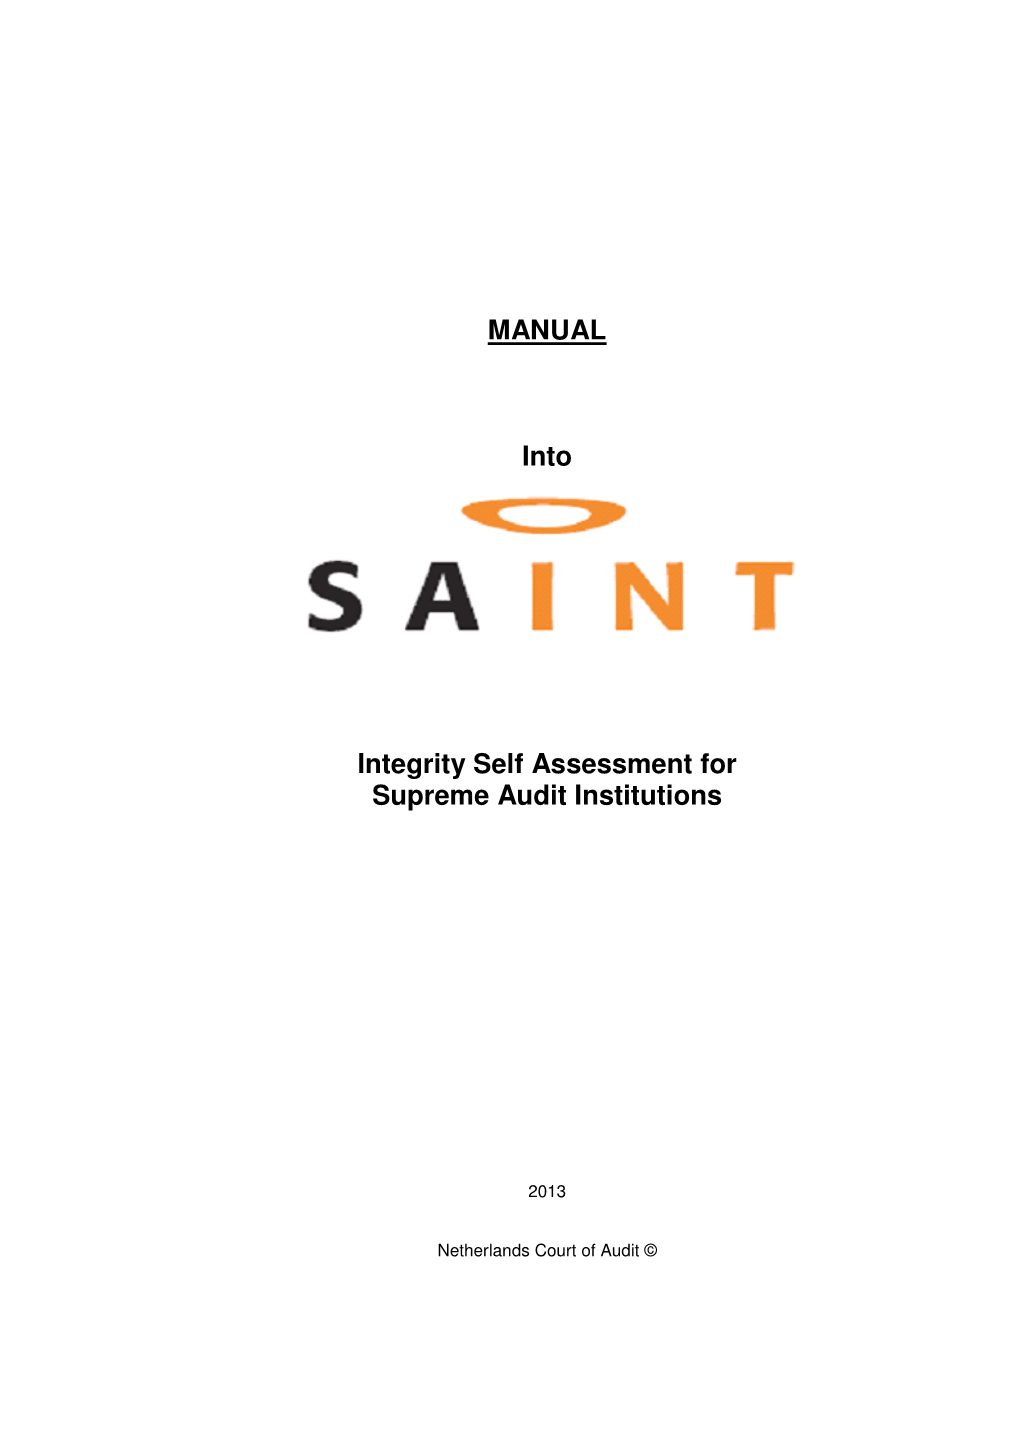 MANUAL Into Integrity Self Assessment for Supreme Audit